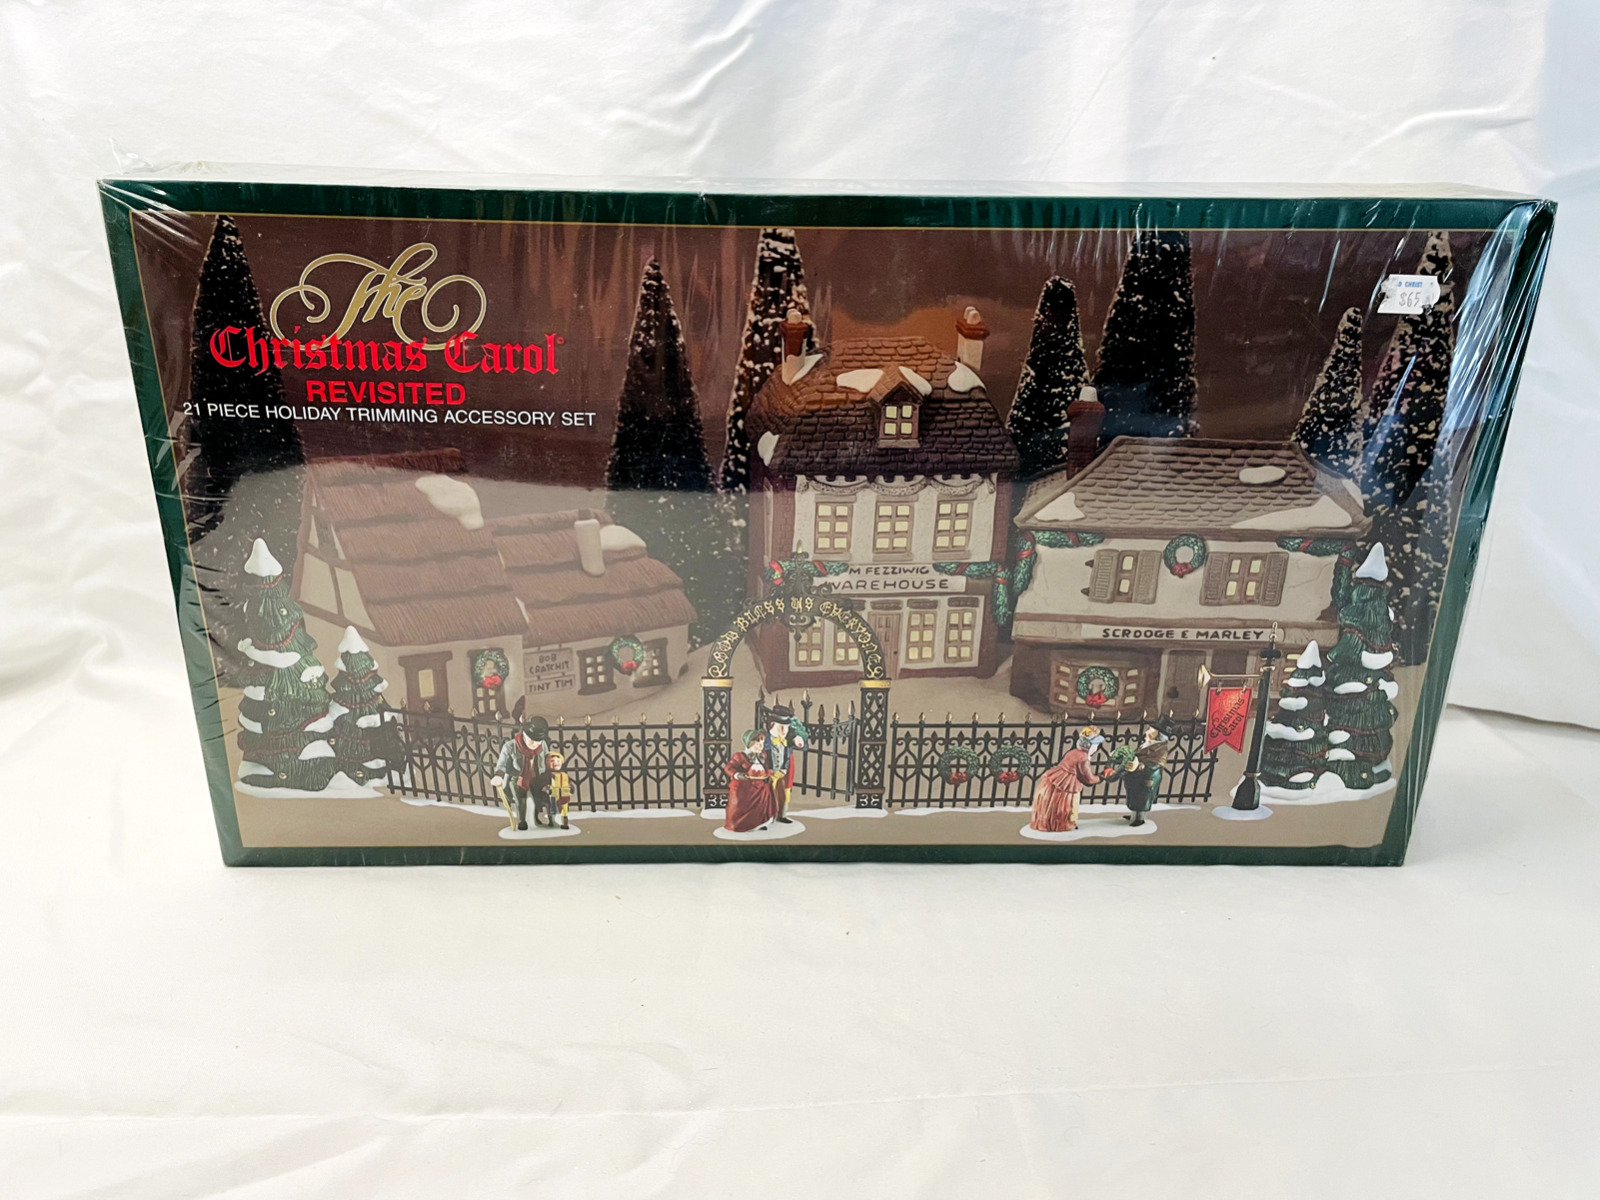 The Christmas Carol Revisited 21 Piece Holiday Trimming Accessory Set Scrooge